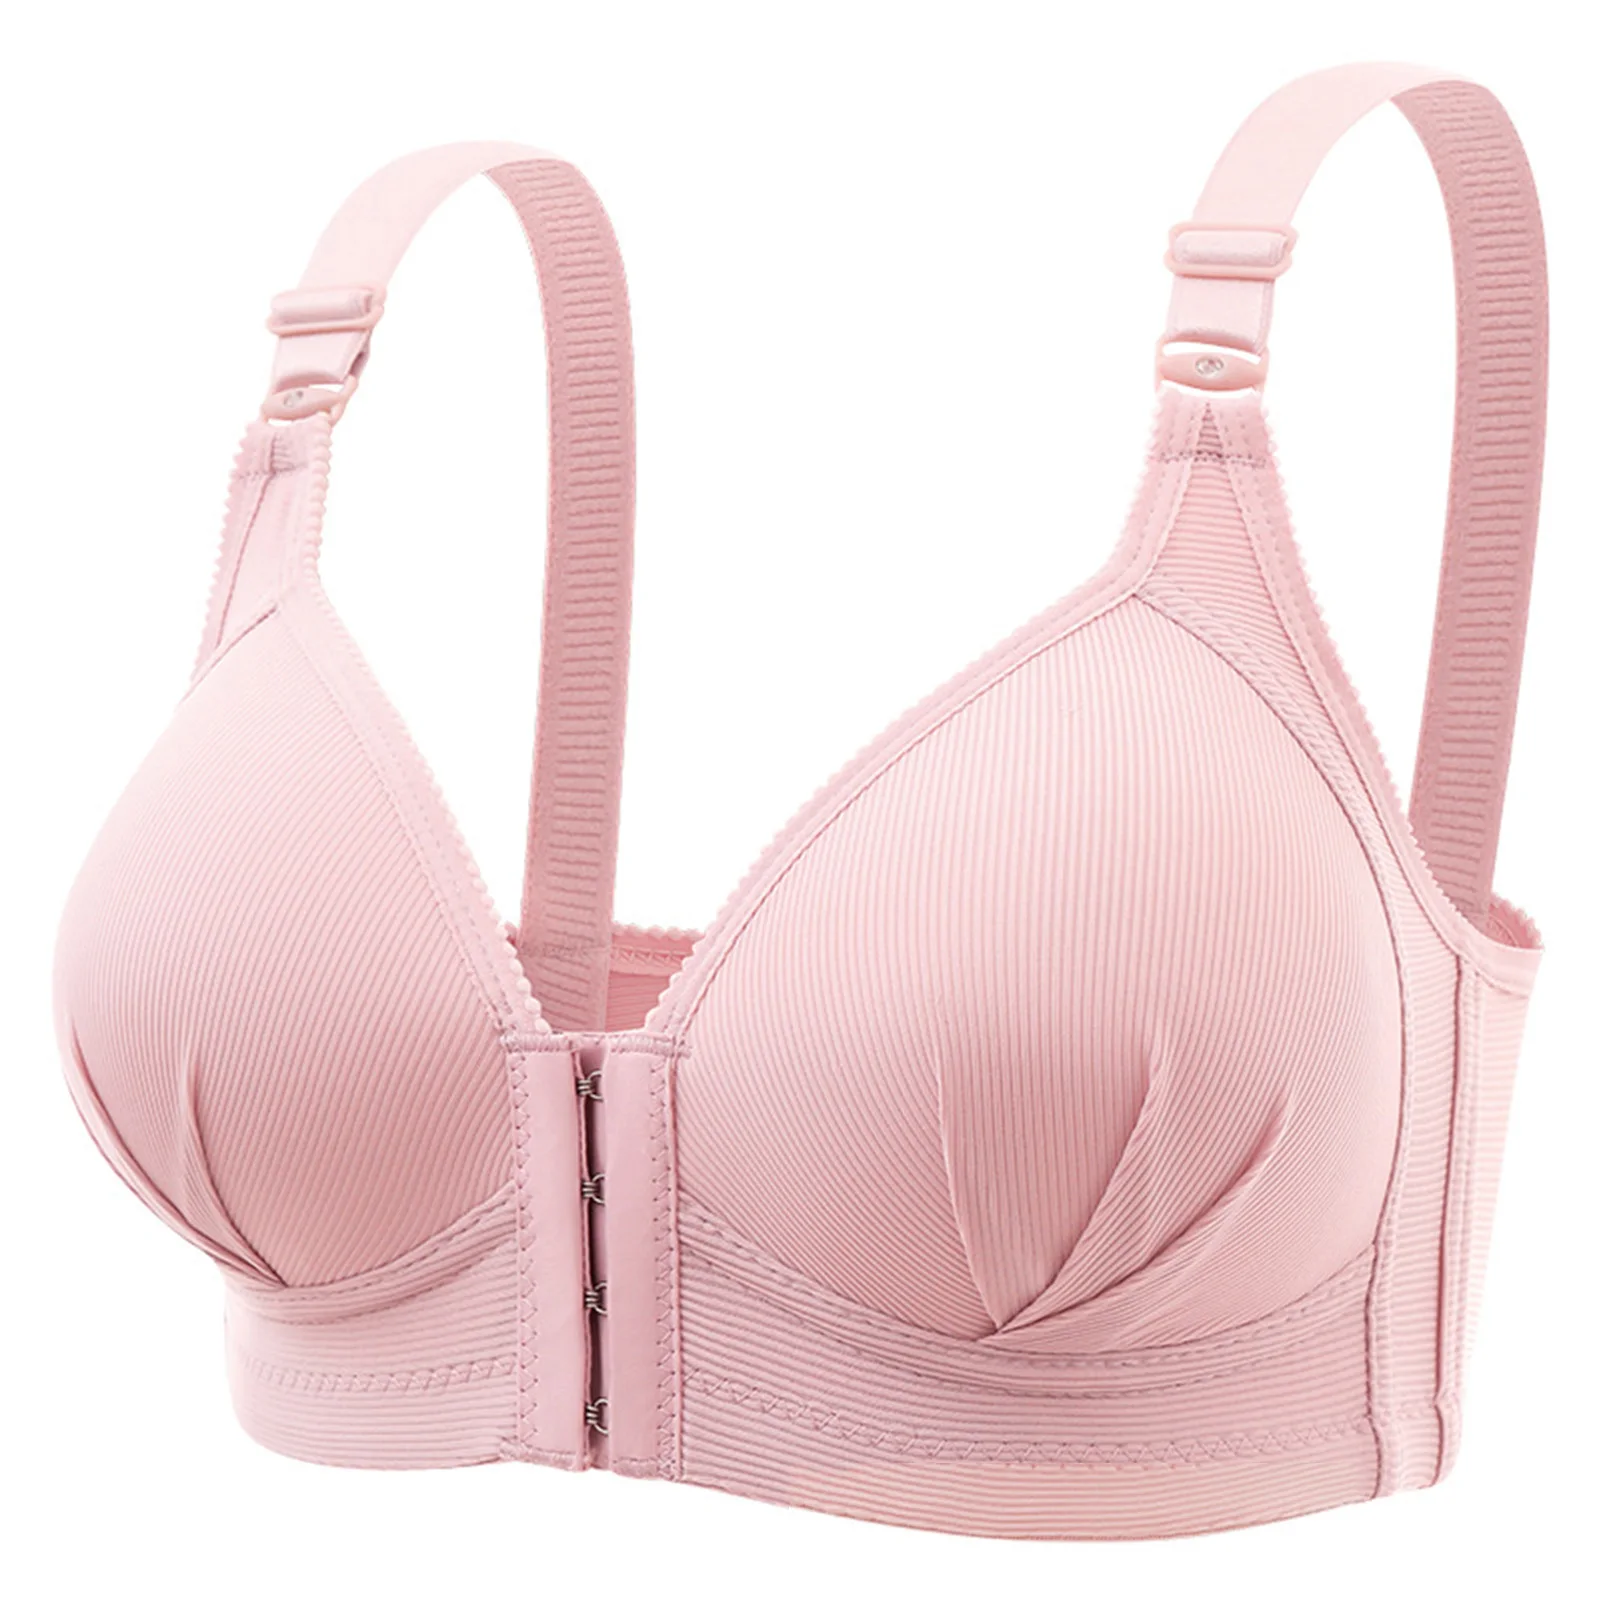 

Front Closure Bras for Women Full Coverage Everyday Bra with Support Shaping Bra for Casual Vacation Outfit